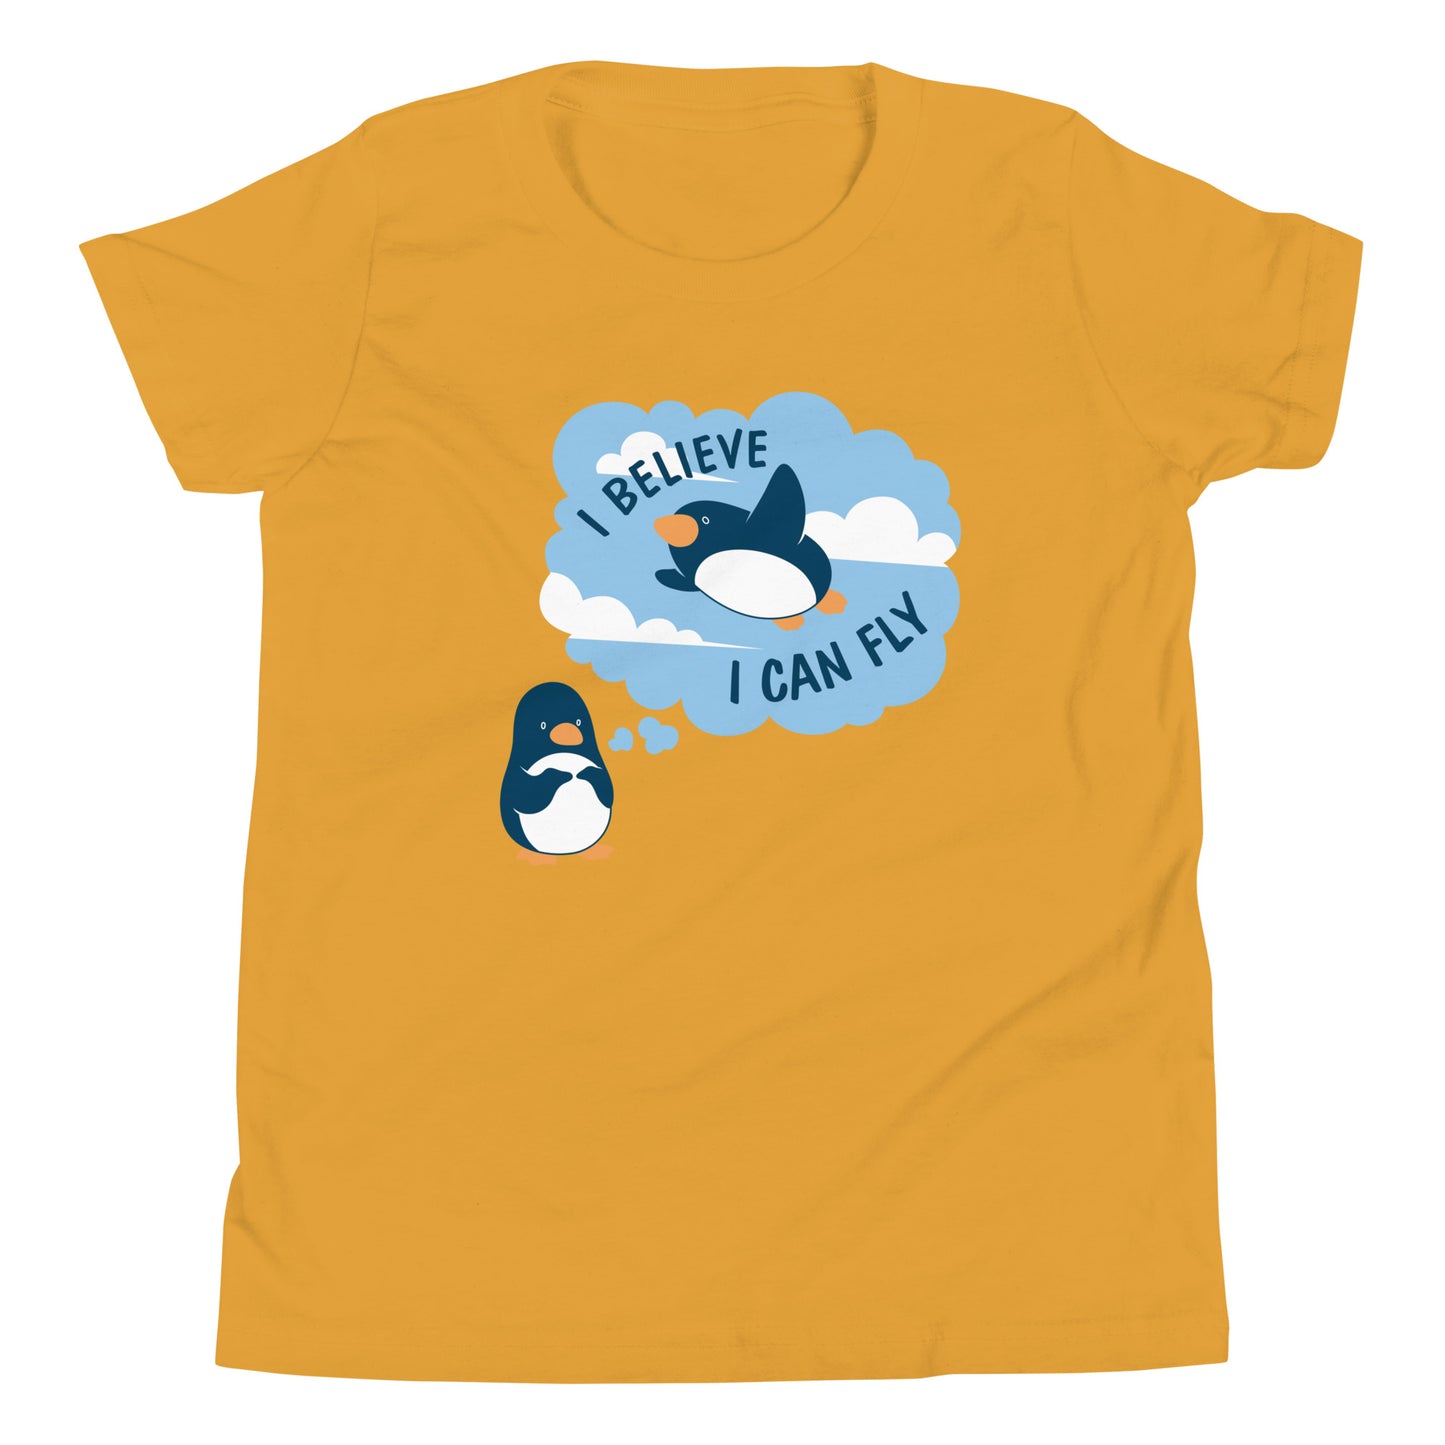 I Believe I Can Fly Kid's Youth Tee